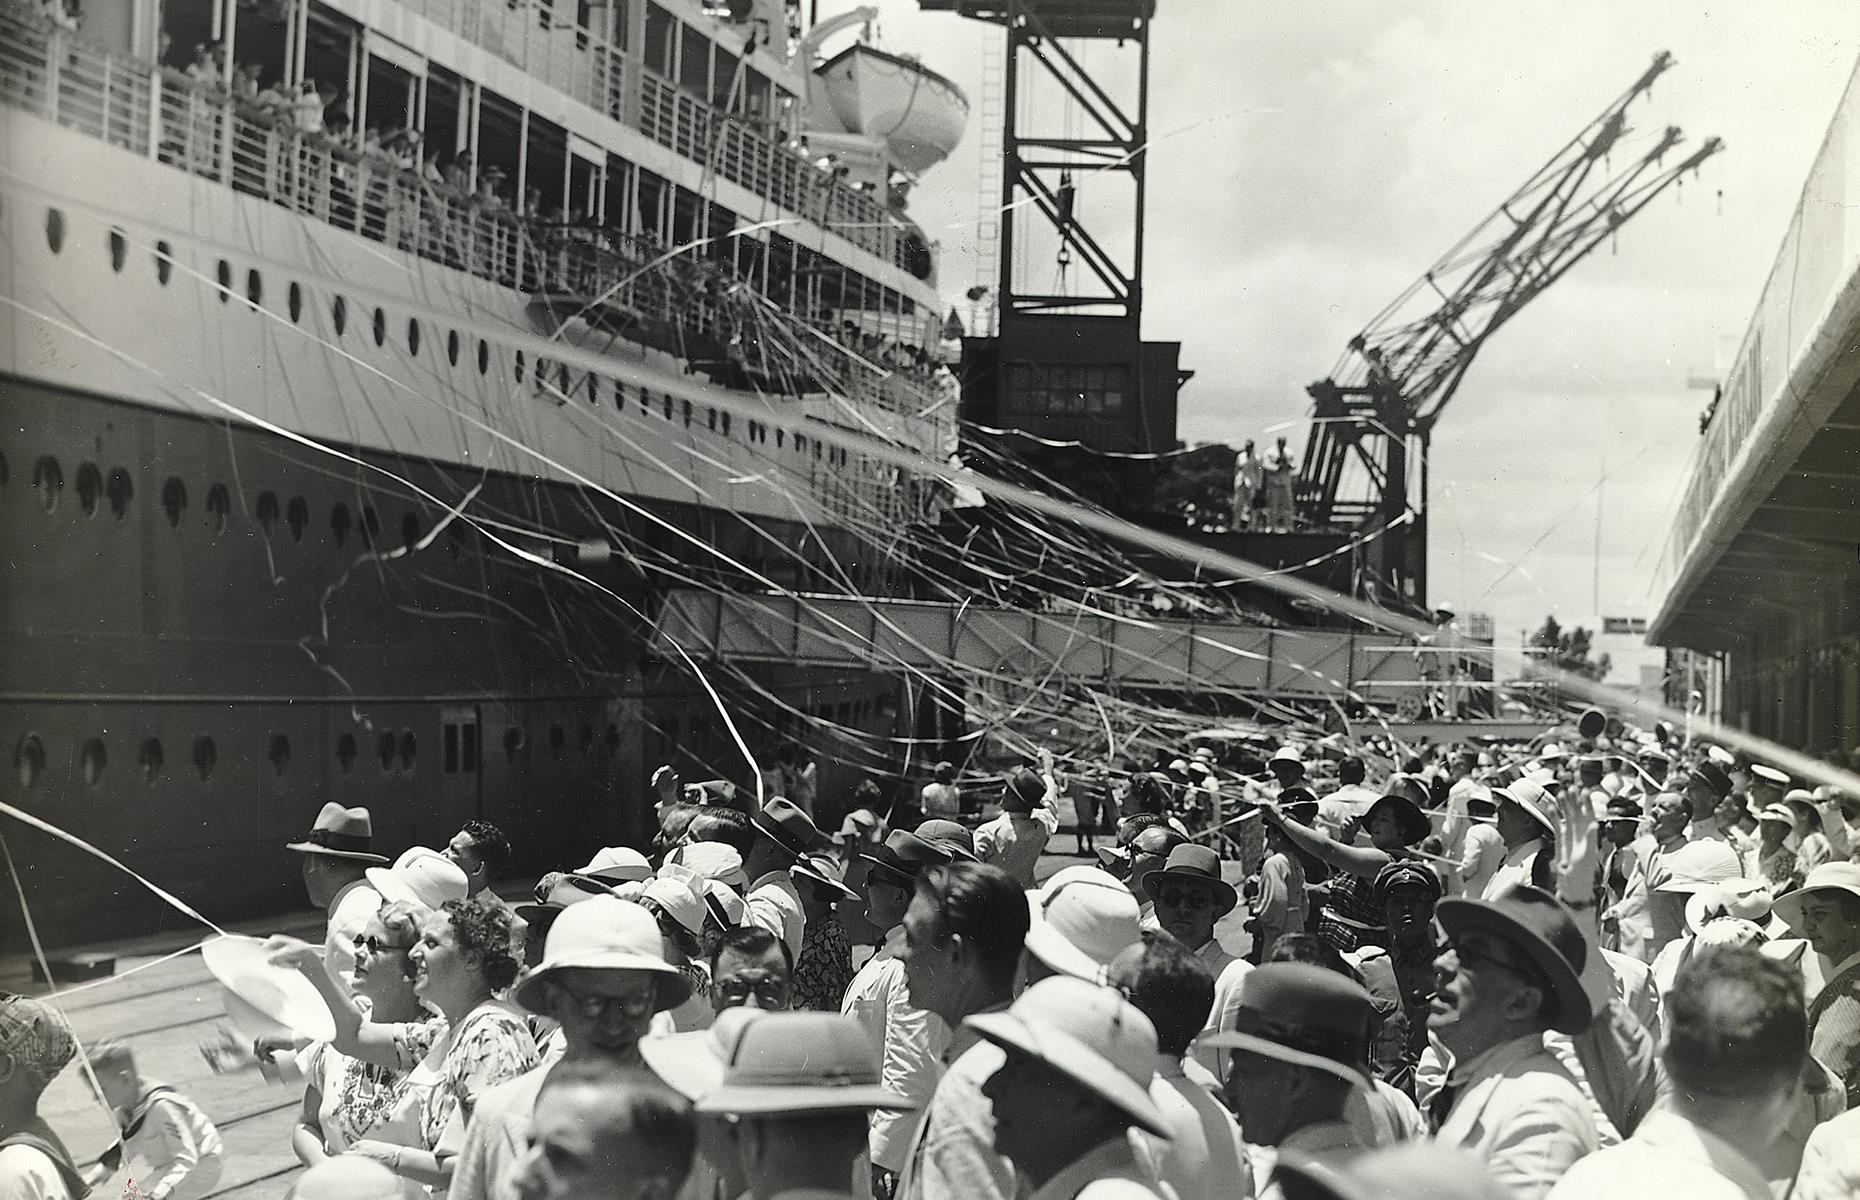 The Second World War was another blow to commercial cruising: yet again, liners were repurposed as war vessels and pleasure cruising came to an abrupt halt. By the end of the decade, though, surviving ships were returned to their lines and put back into service. Slowly but surely, the appetite for cruising grew again. Here an excited crowd welcomes a ship at a Java seaport in the 1940s.